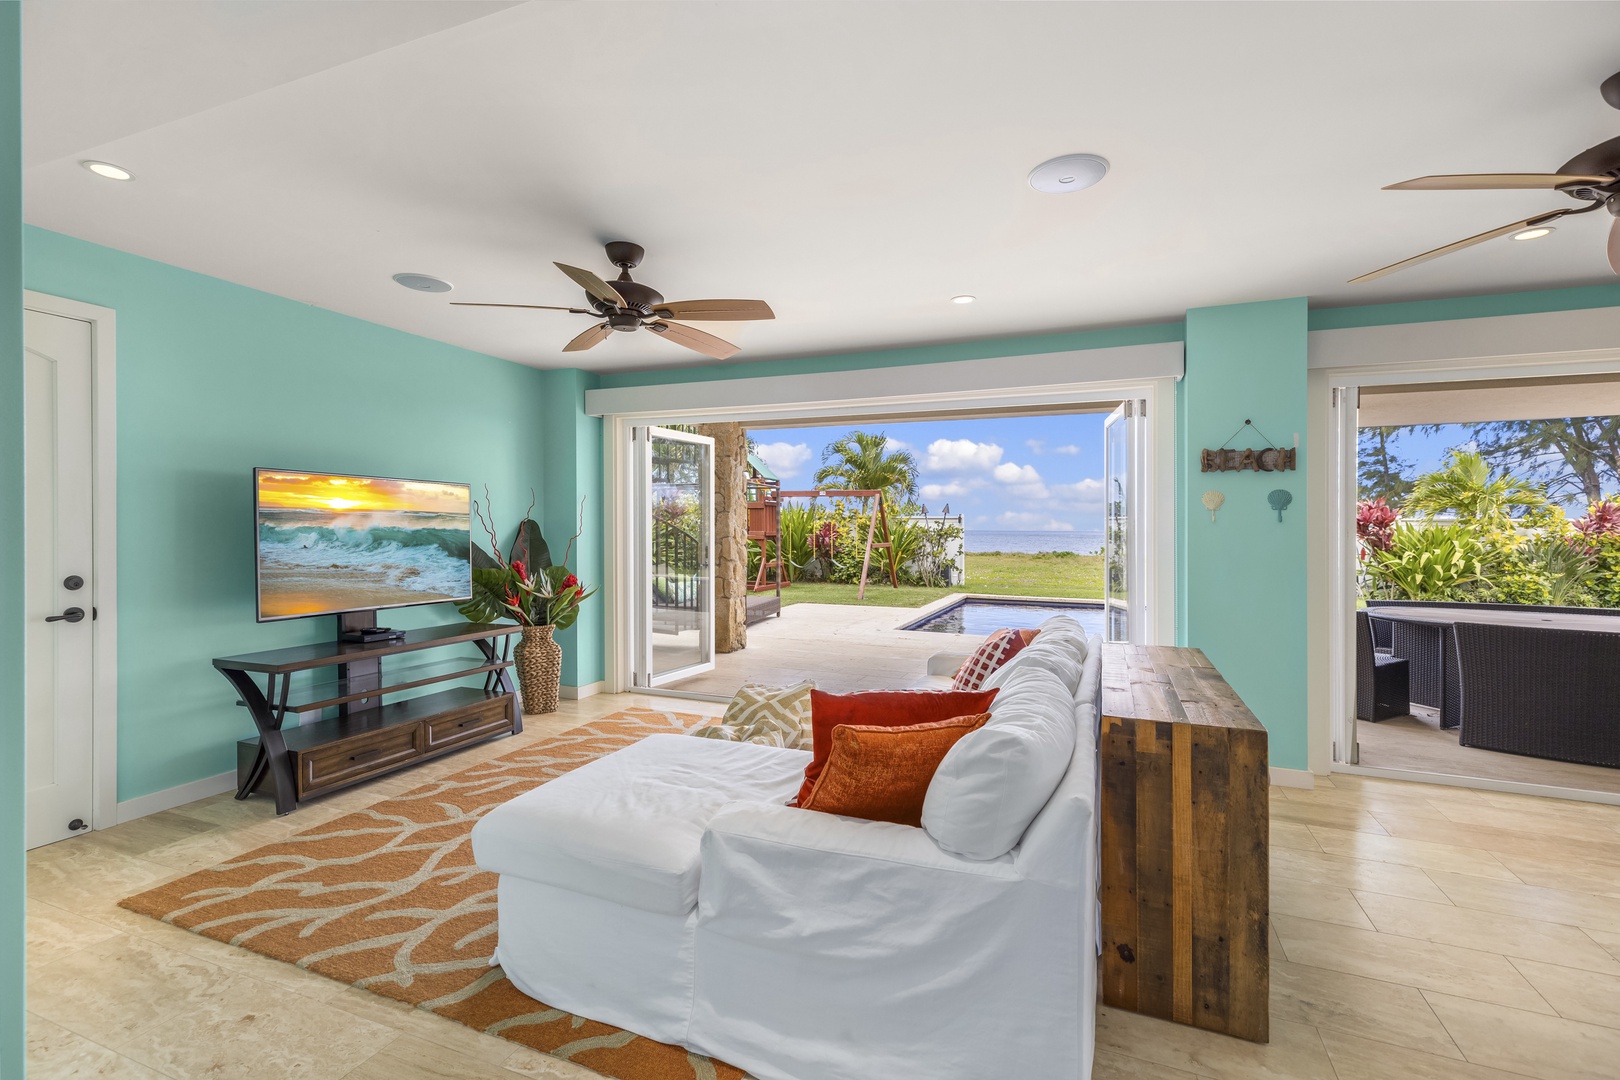 Waialua Vacation Rentals, Kala'iku Estate - Lounge on the comfy couches with extra sleeping